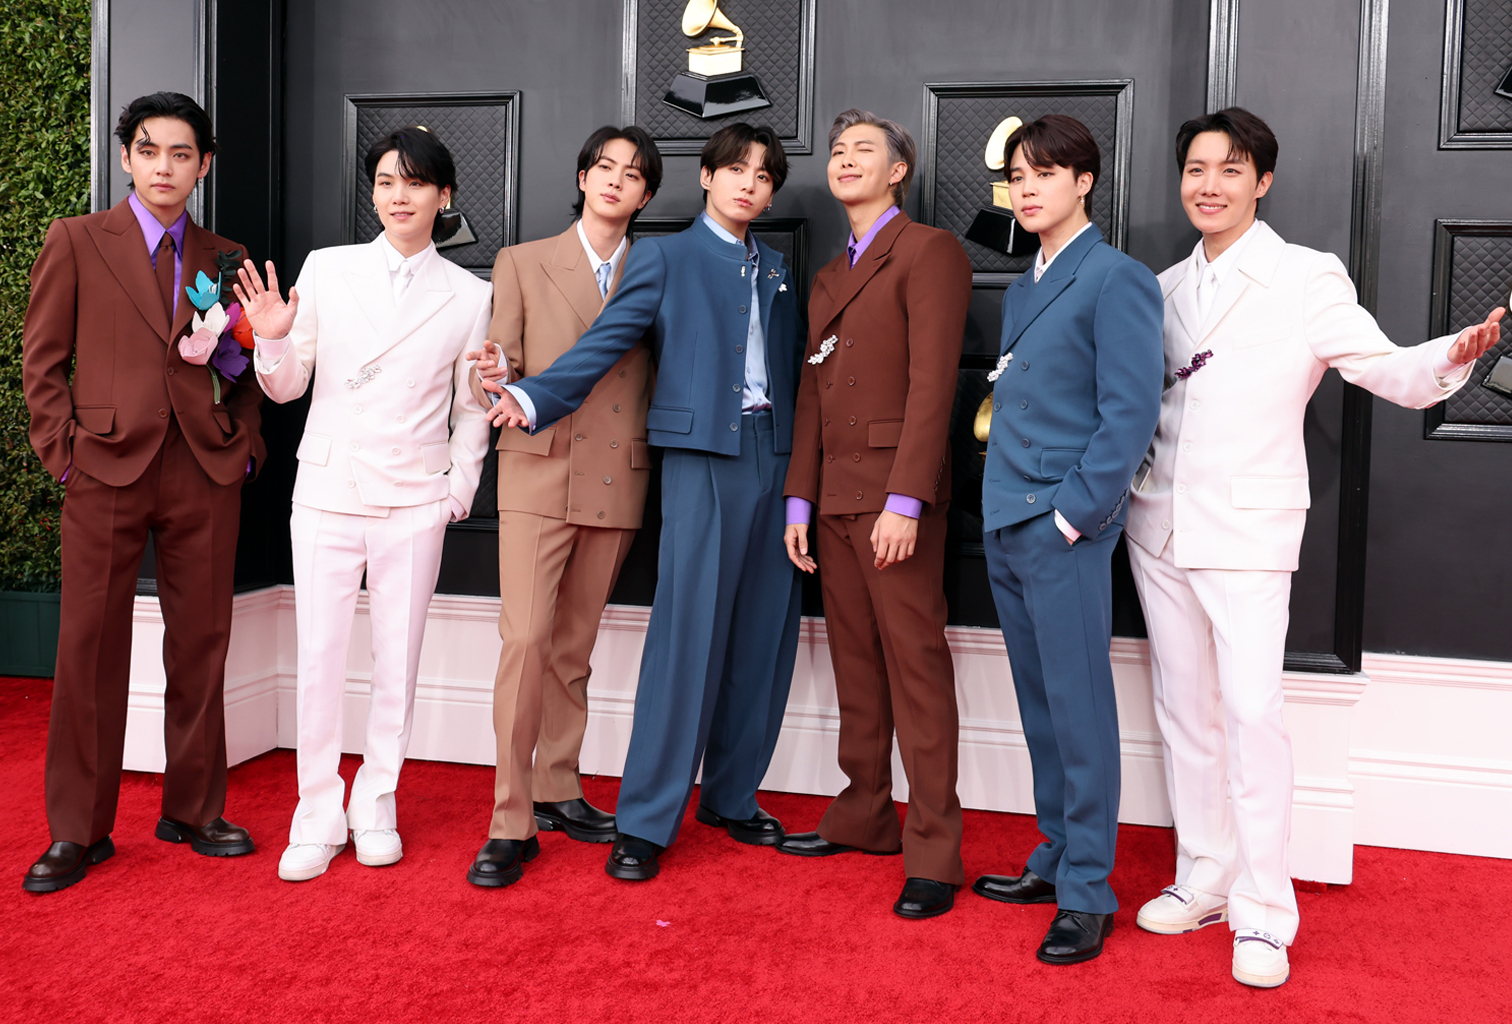 Update: BTS bags 3 nominations at 65th Grammy Awards